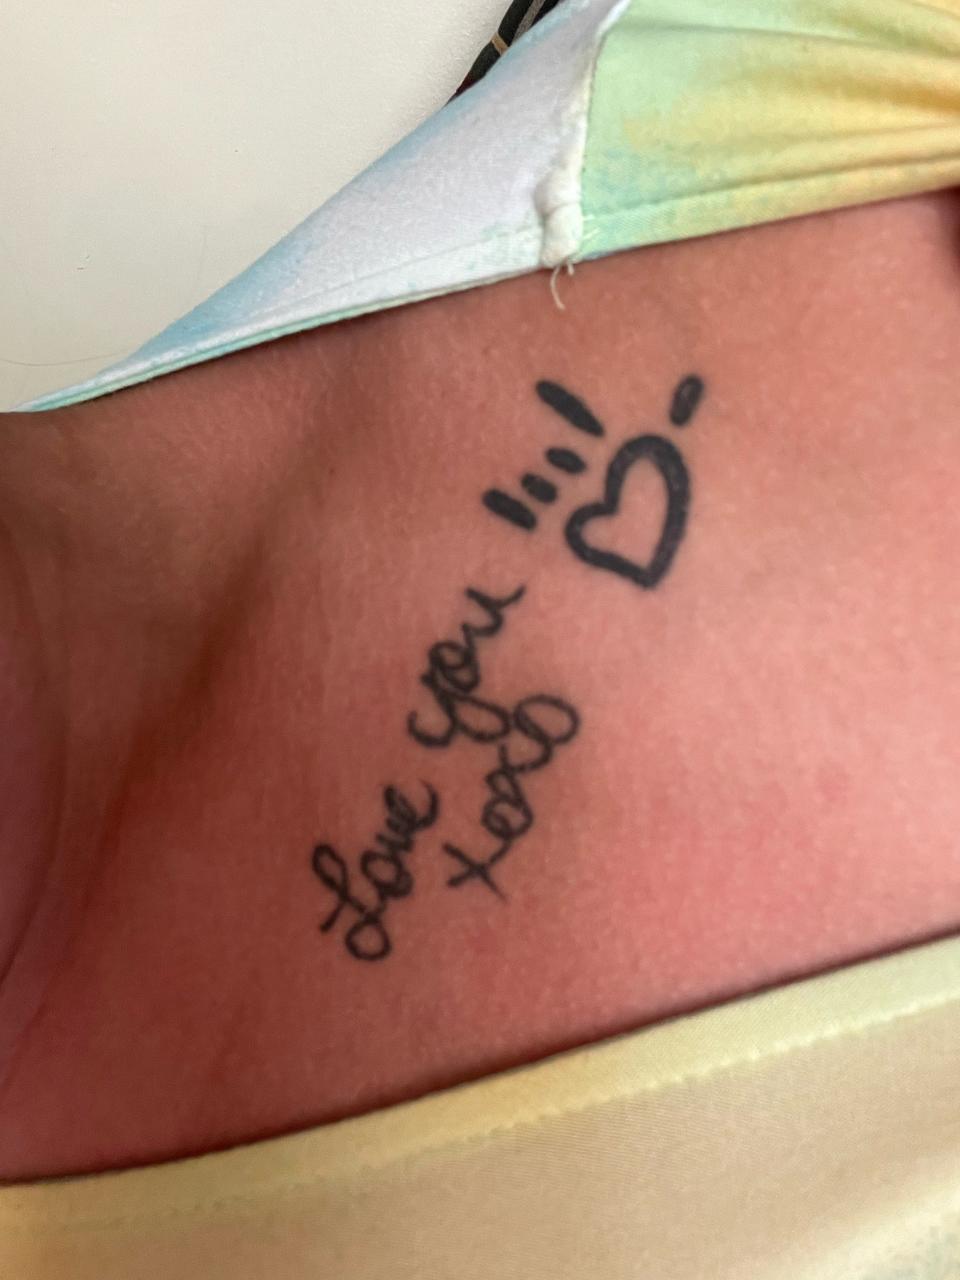 Amanda Petermann's tattoo is the words "Love you xoxo" in her mother's handwriting, next to the sign language for "I love you"